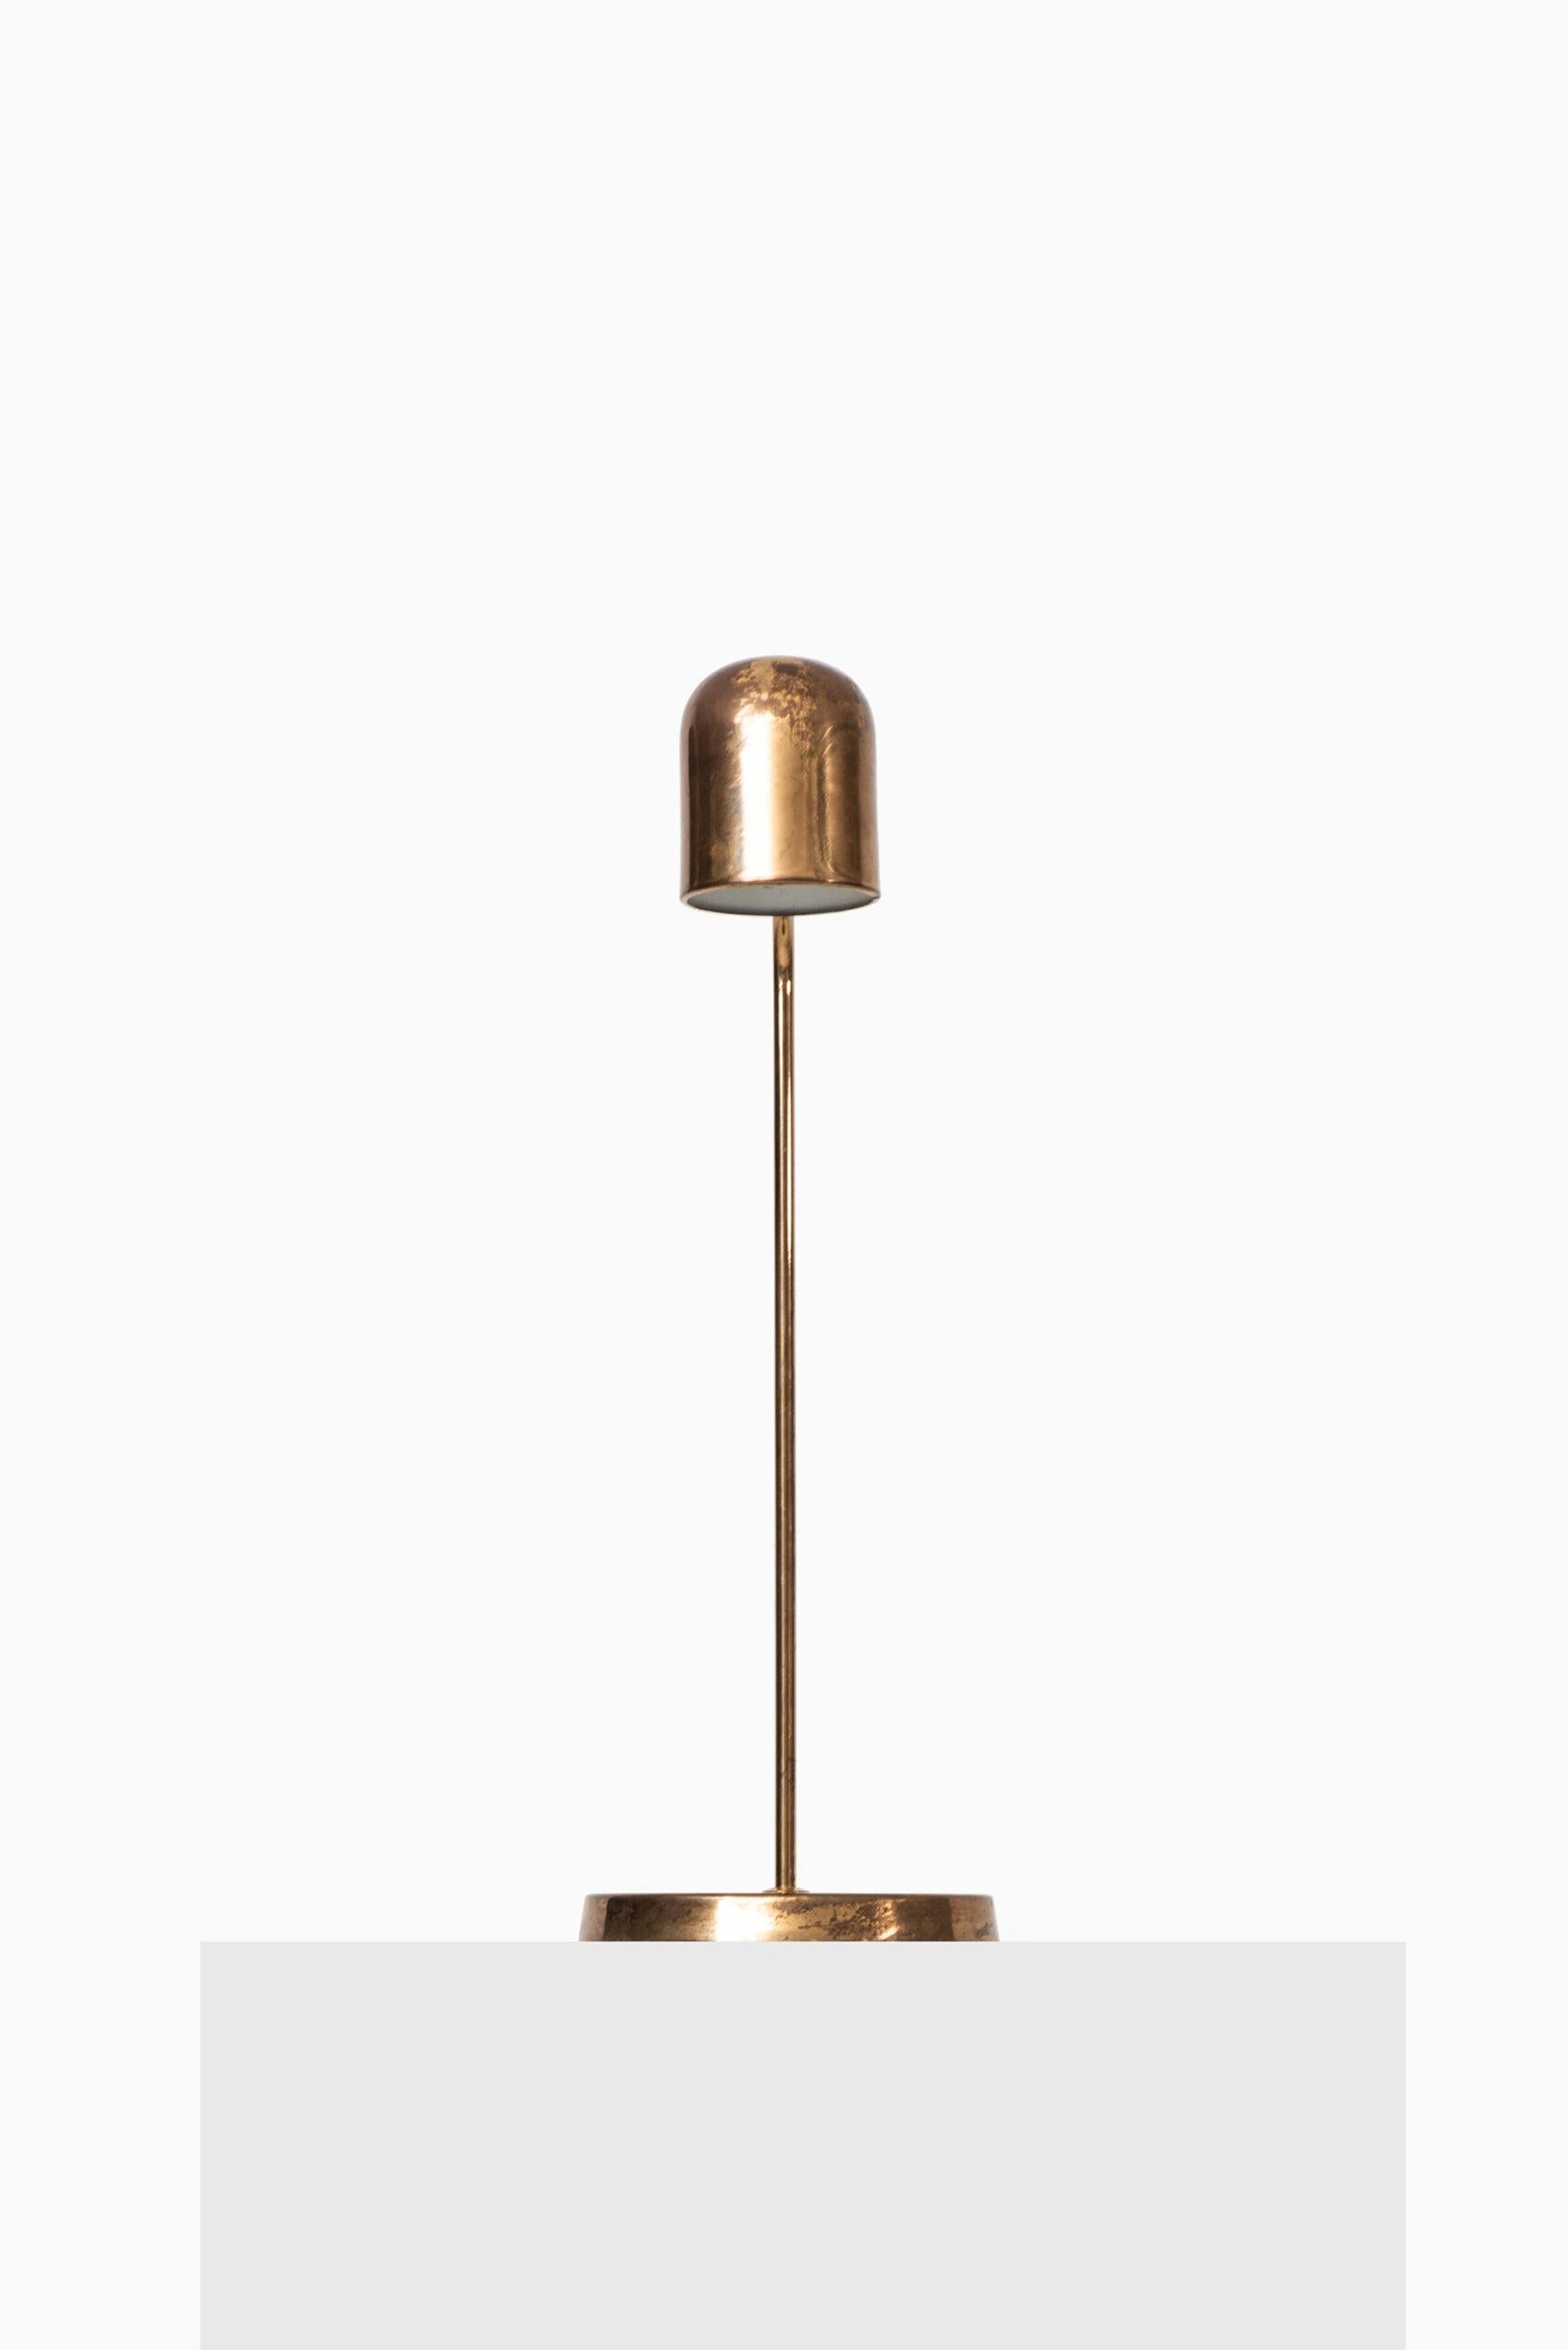 Rare table lamp by unknown designer. Produced by Bergbom in Sweden.